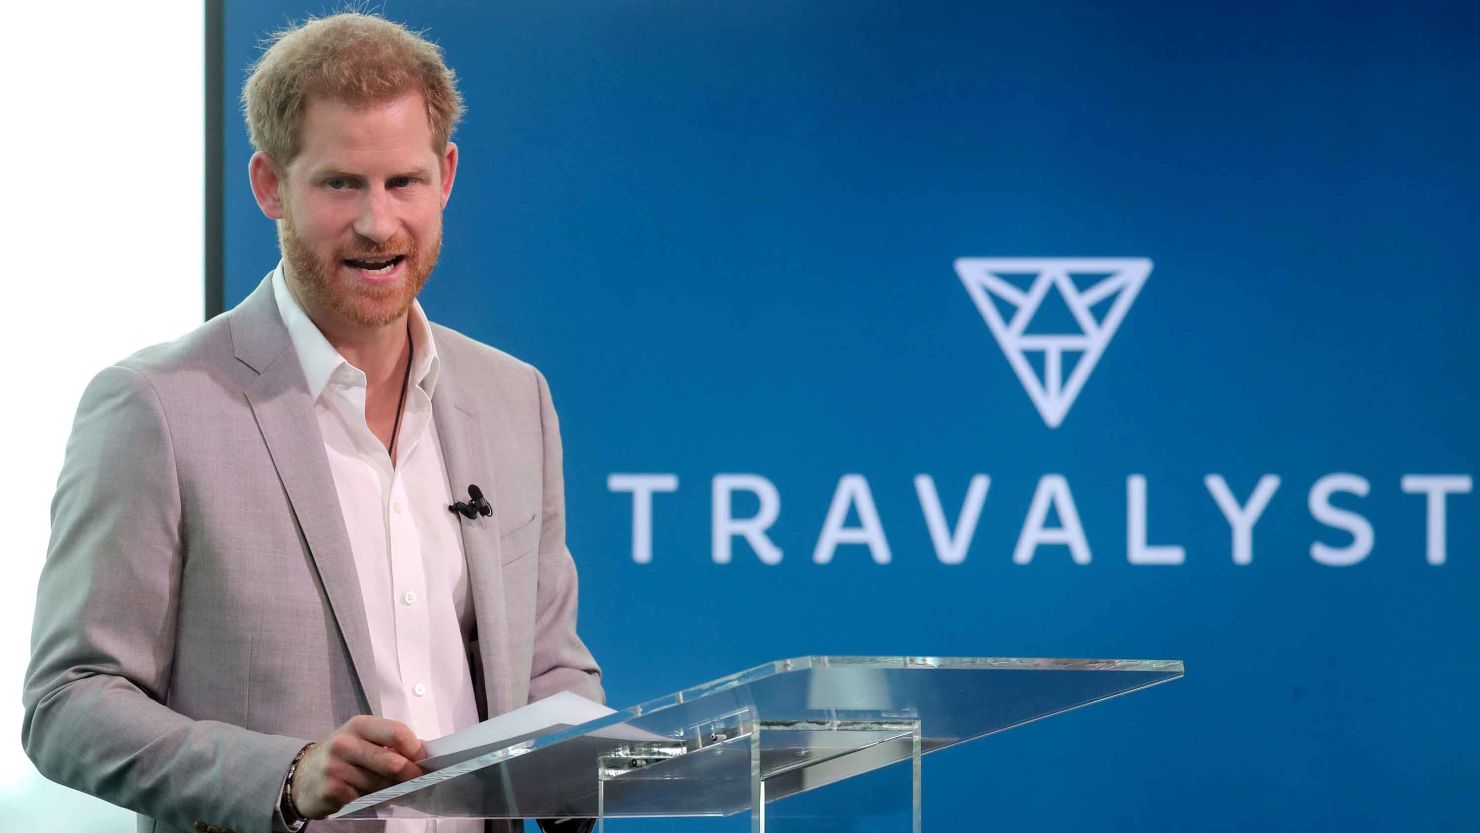 Prince Harry announced the Travalyst initiative in Amsterdam Tuesday.